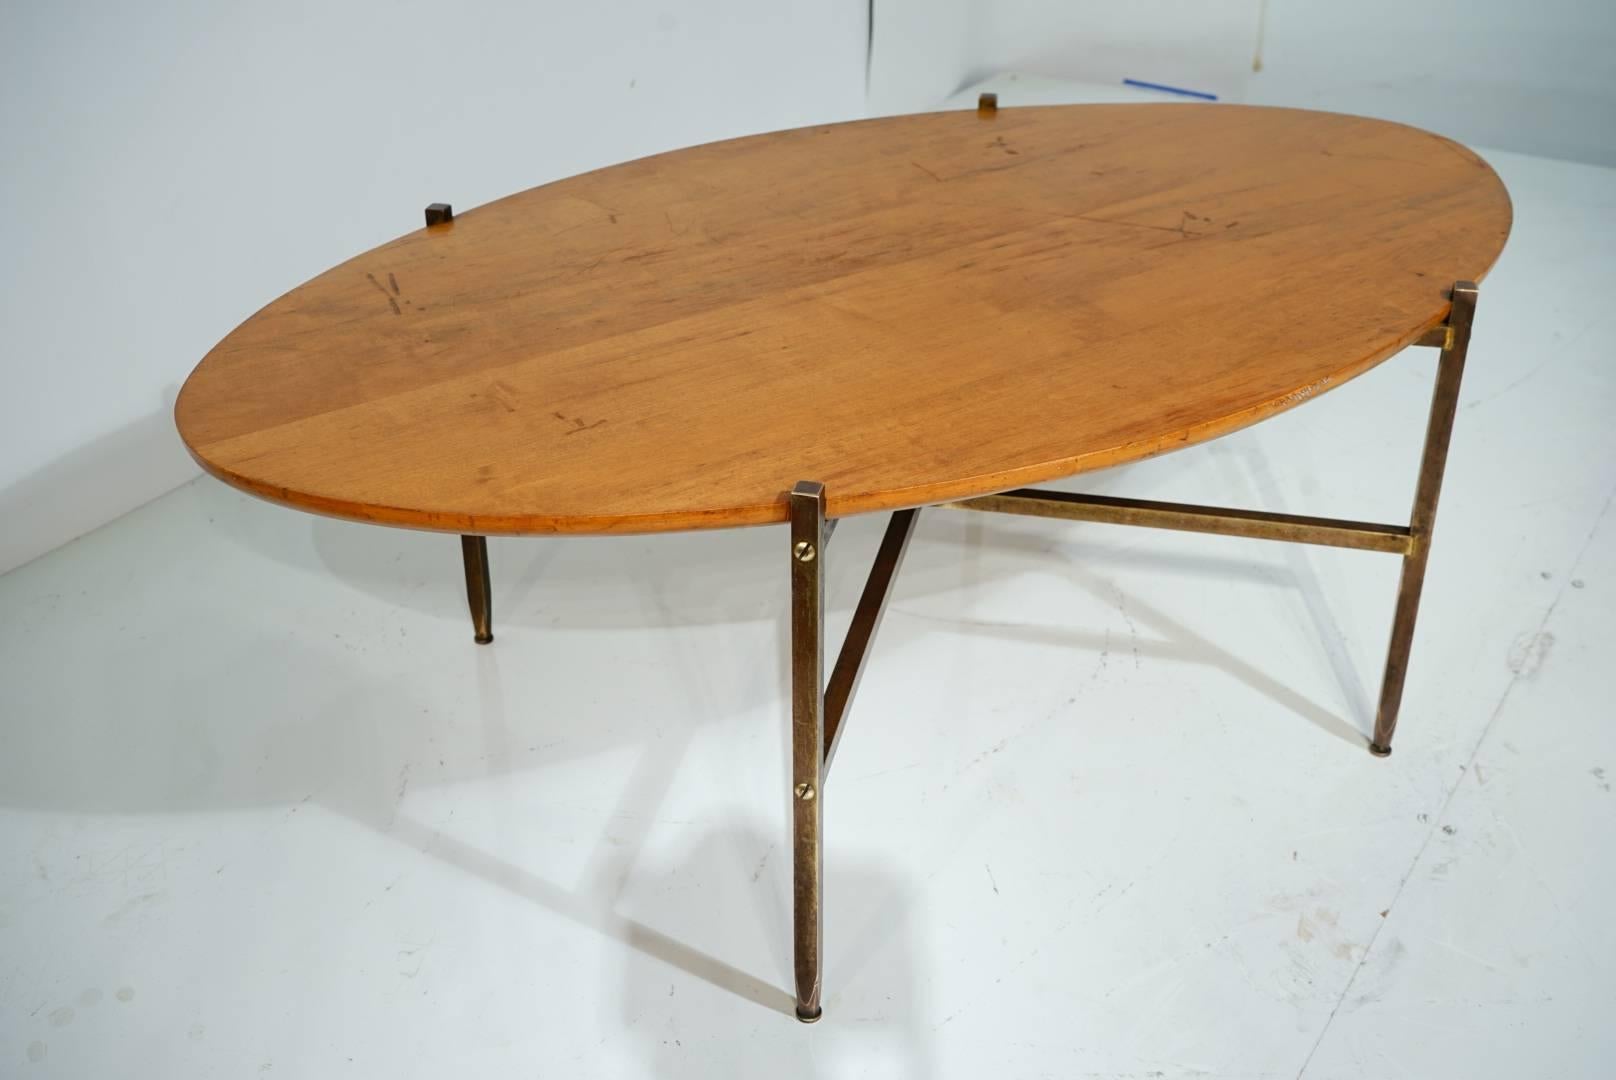 Extremely rare and early Milo Baughman architectural coffee table with solid brass base, circa 1950.